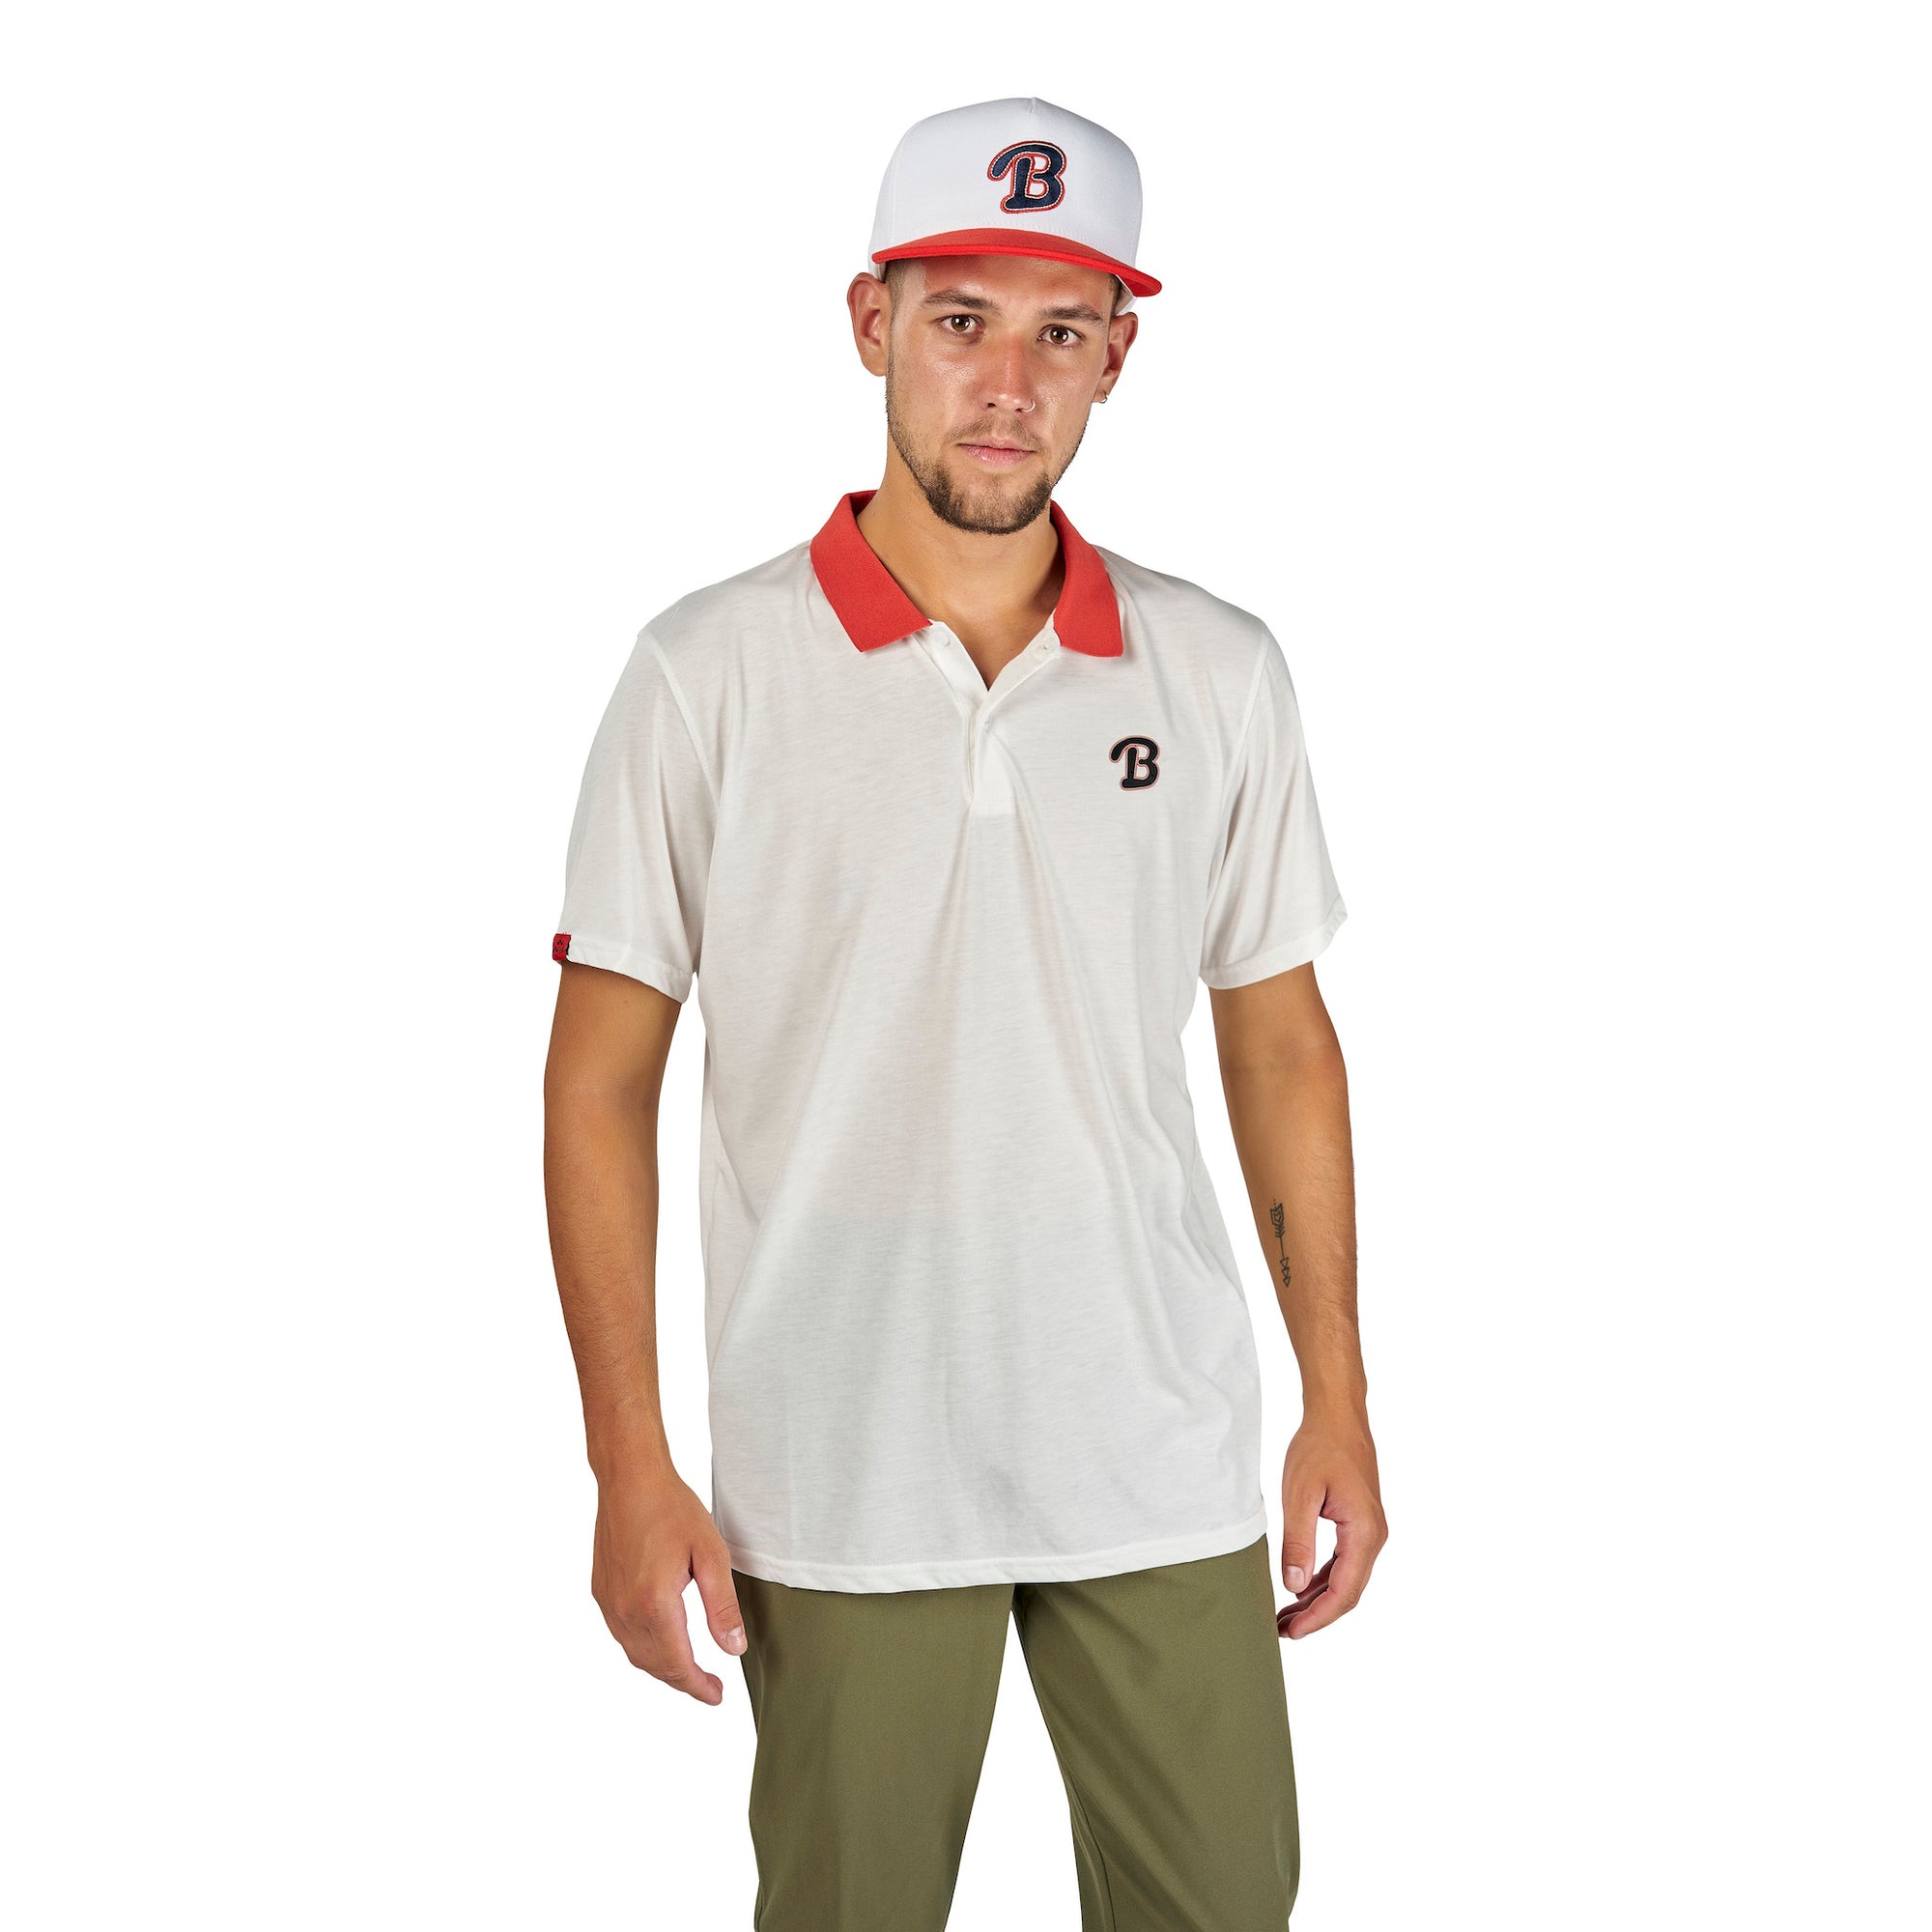 Golf polos don't get any better than this.  Cool white and red baller polo for all the ballers and B's.  Birds of Condor golf apparel